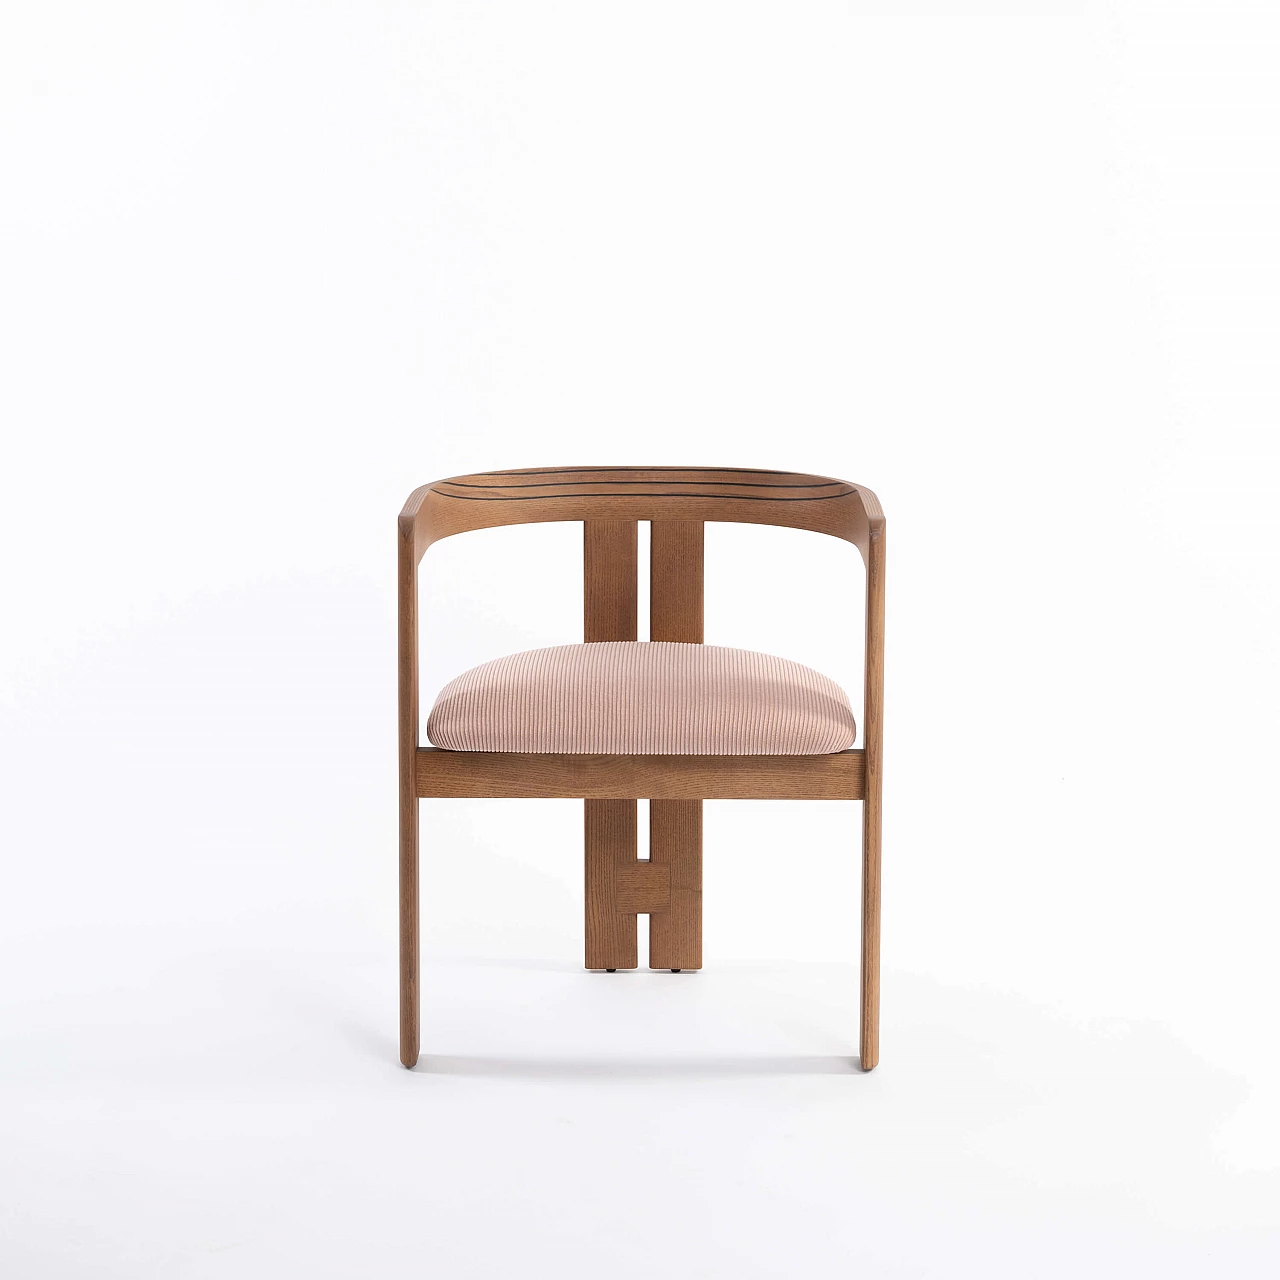 Pigreco chair by Tobia Scarpa for Tacchini 2